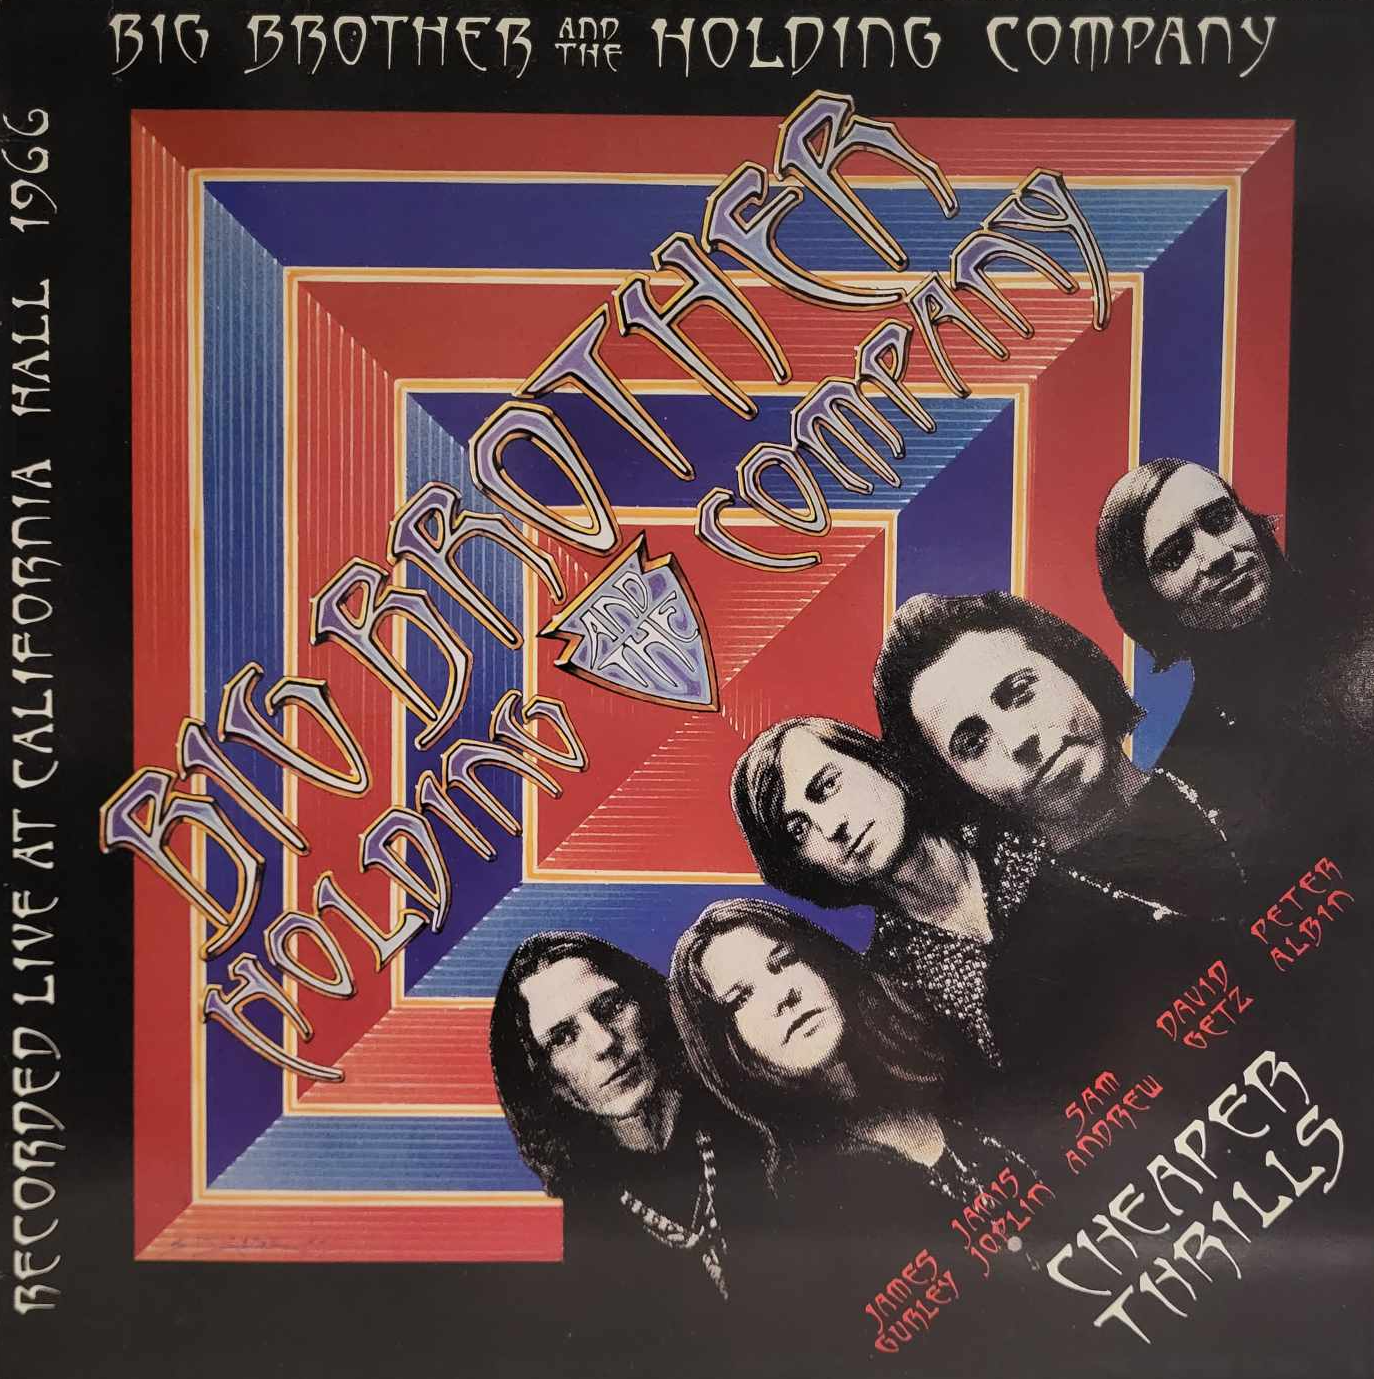 BIG BROTHER & THE HOLDING COMPANY - CHEAPER THRILLS